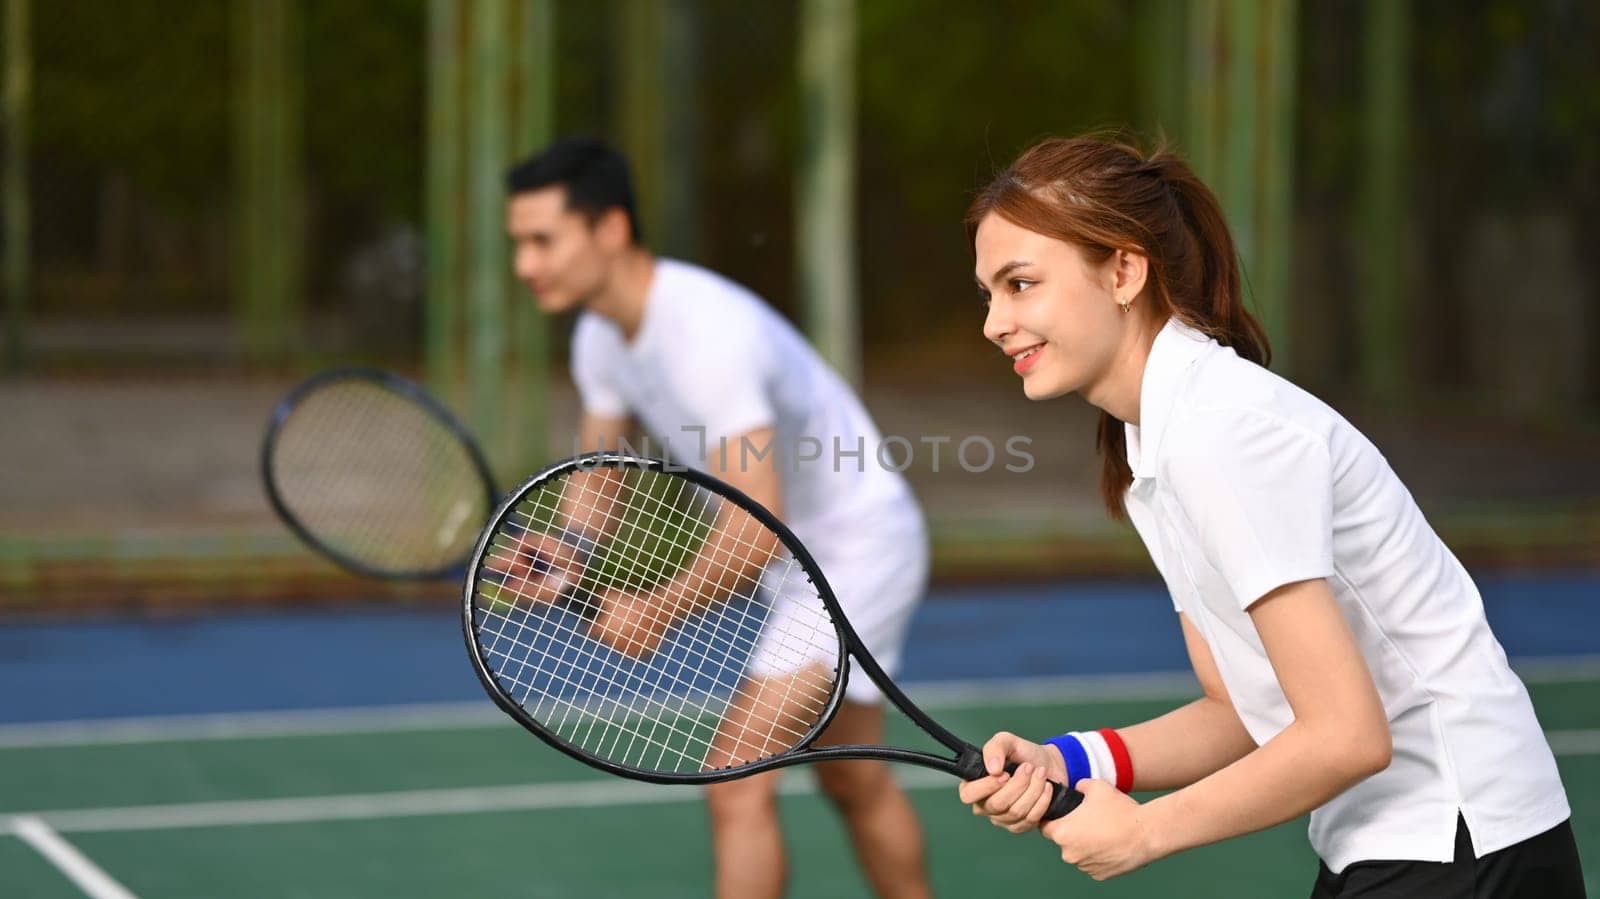 Two tennis players crouching in ready position and holding racket while waiting for serving ball during a competitive match by prathanchorruangsak